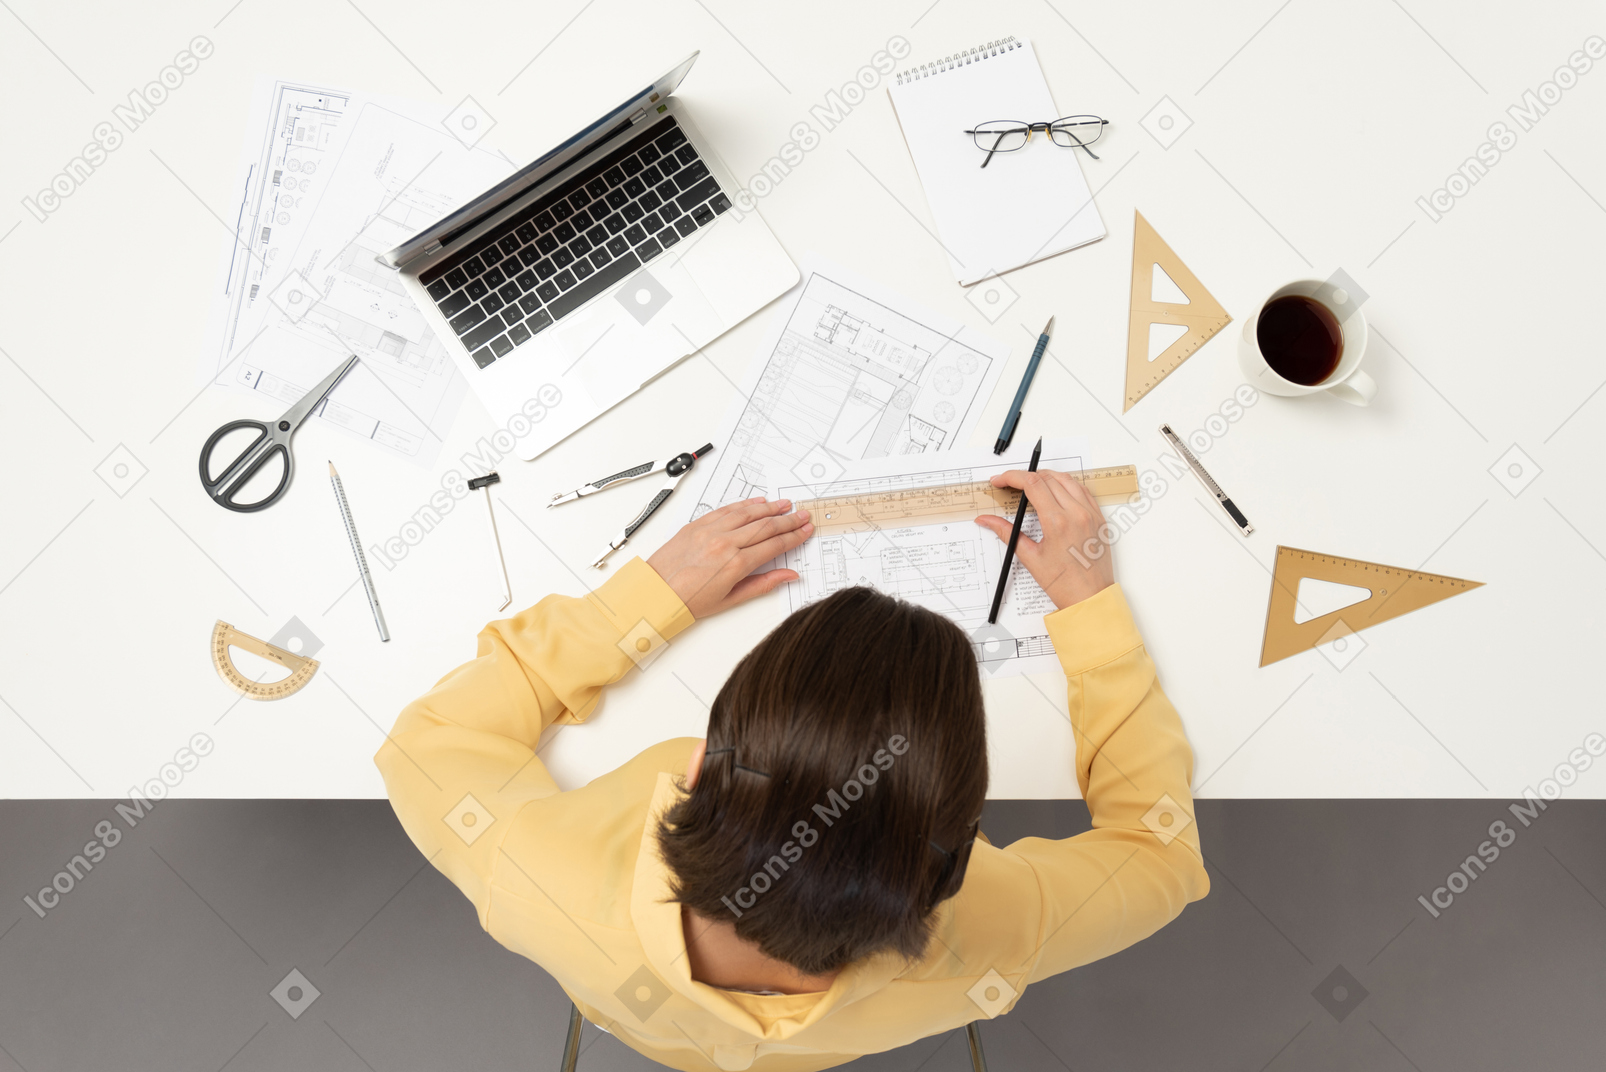 A female architect working on architectural drawings